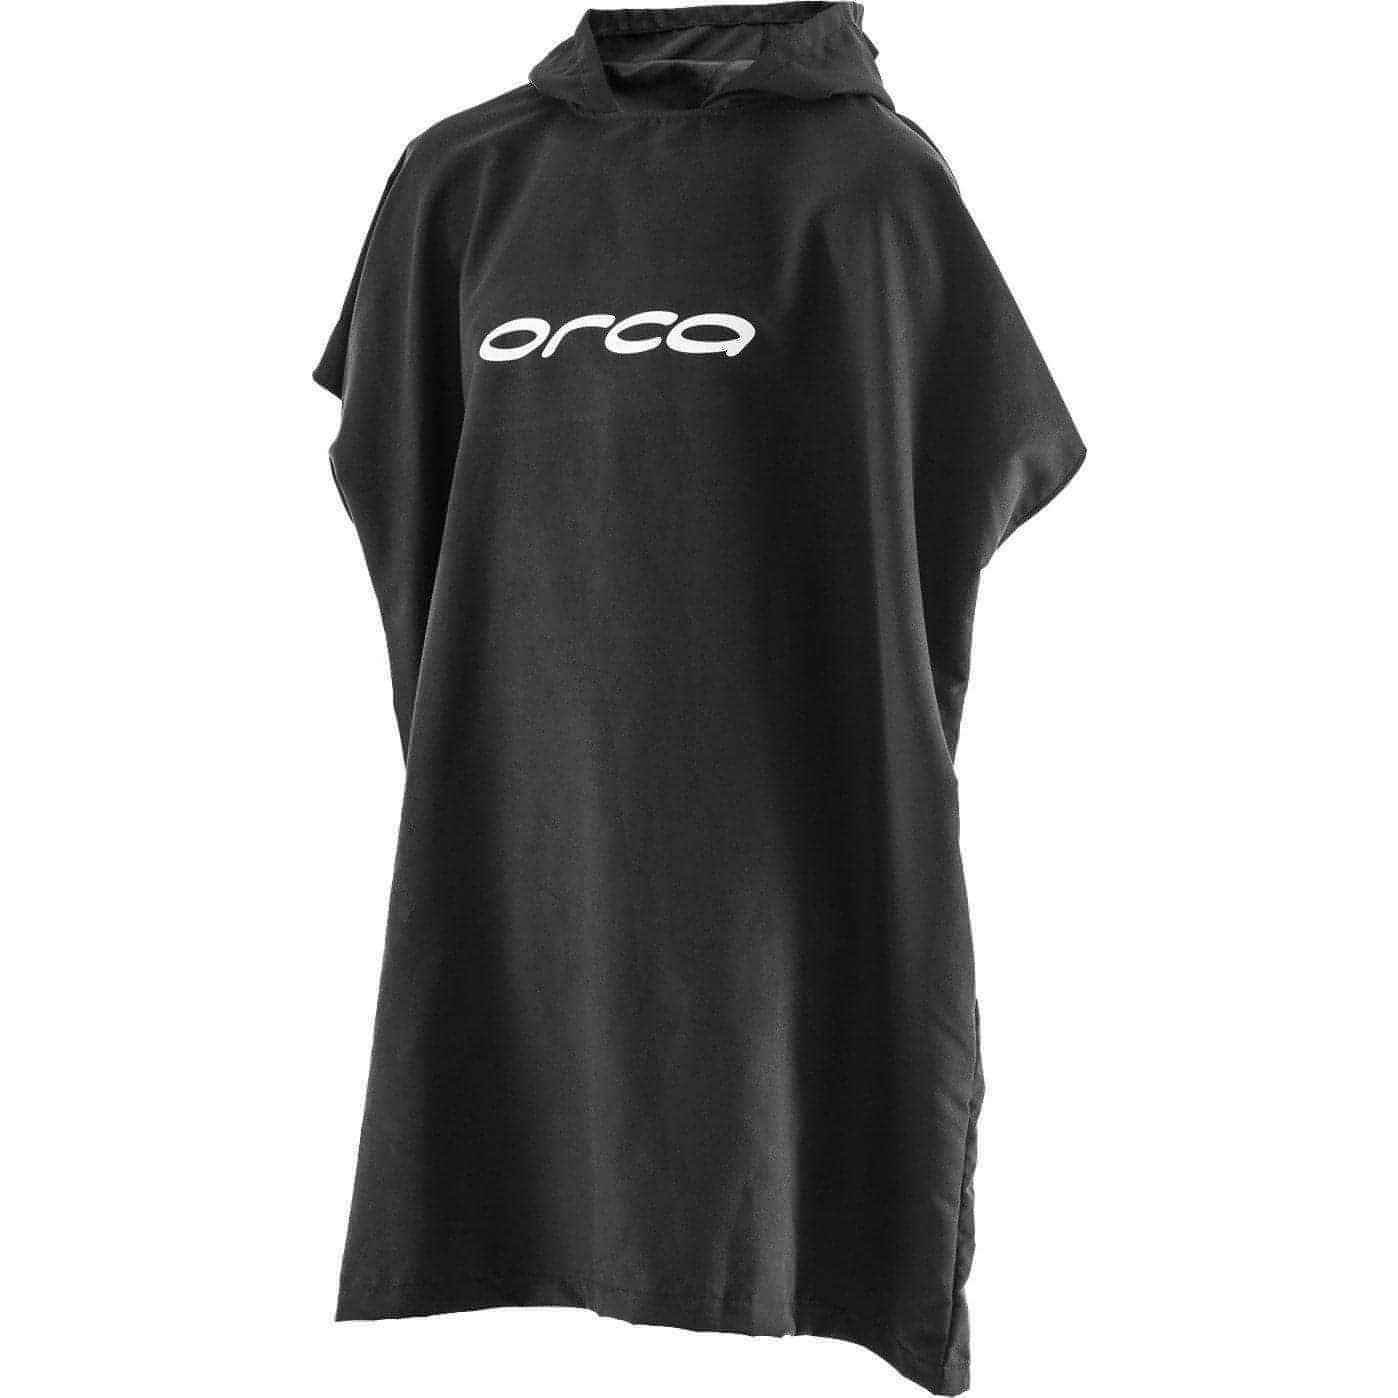 Orca Poncho Towel Changing Robe - Black 8434446385469 - Start Fitness